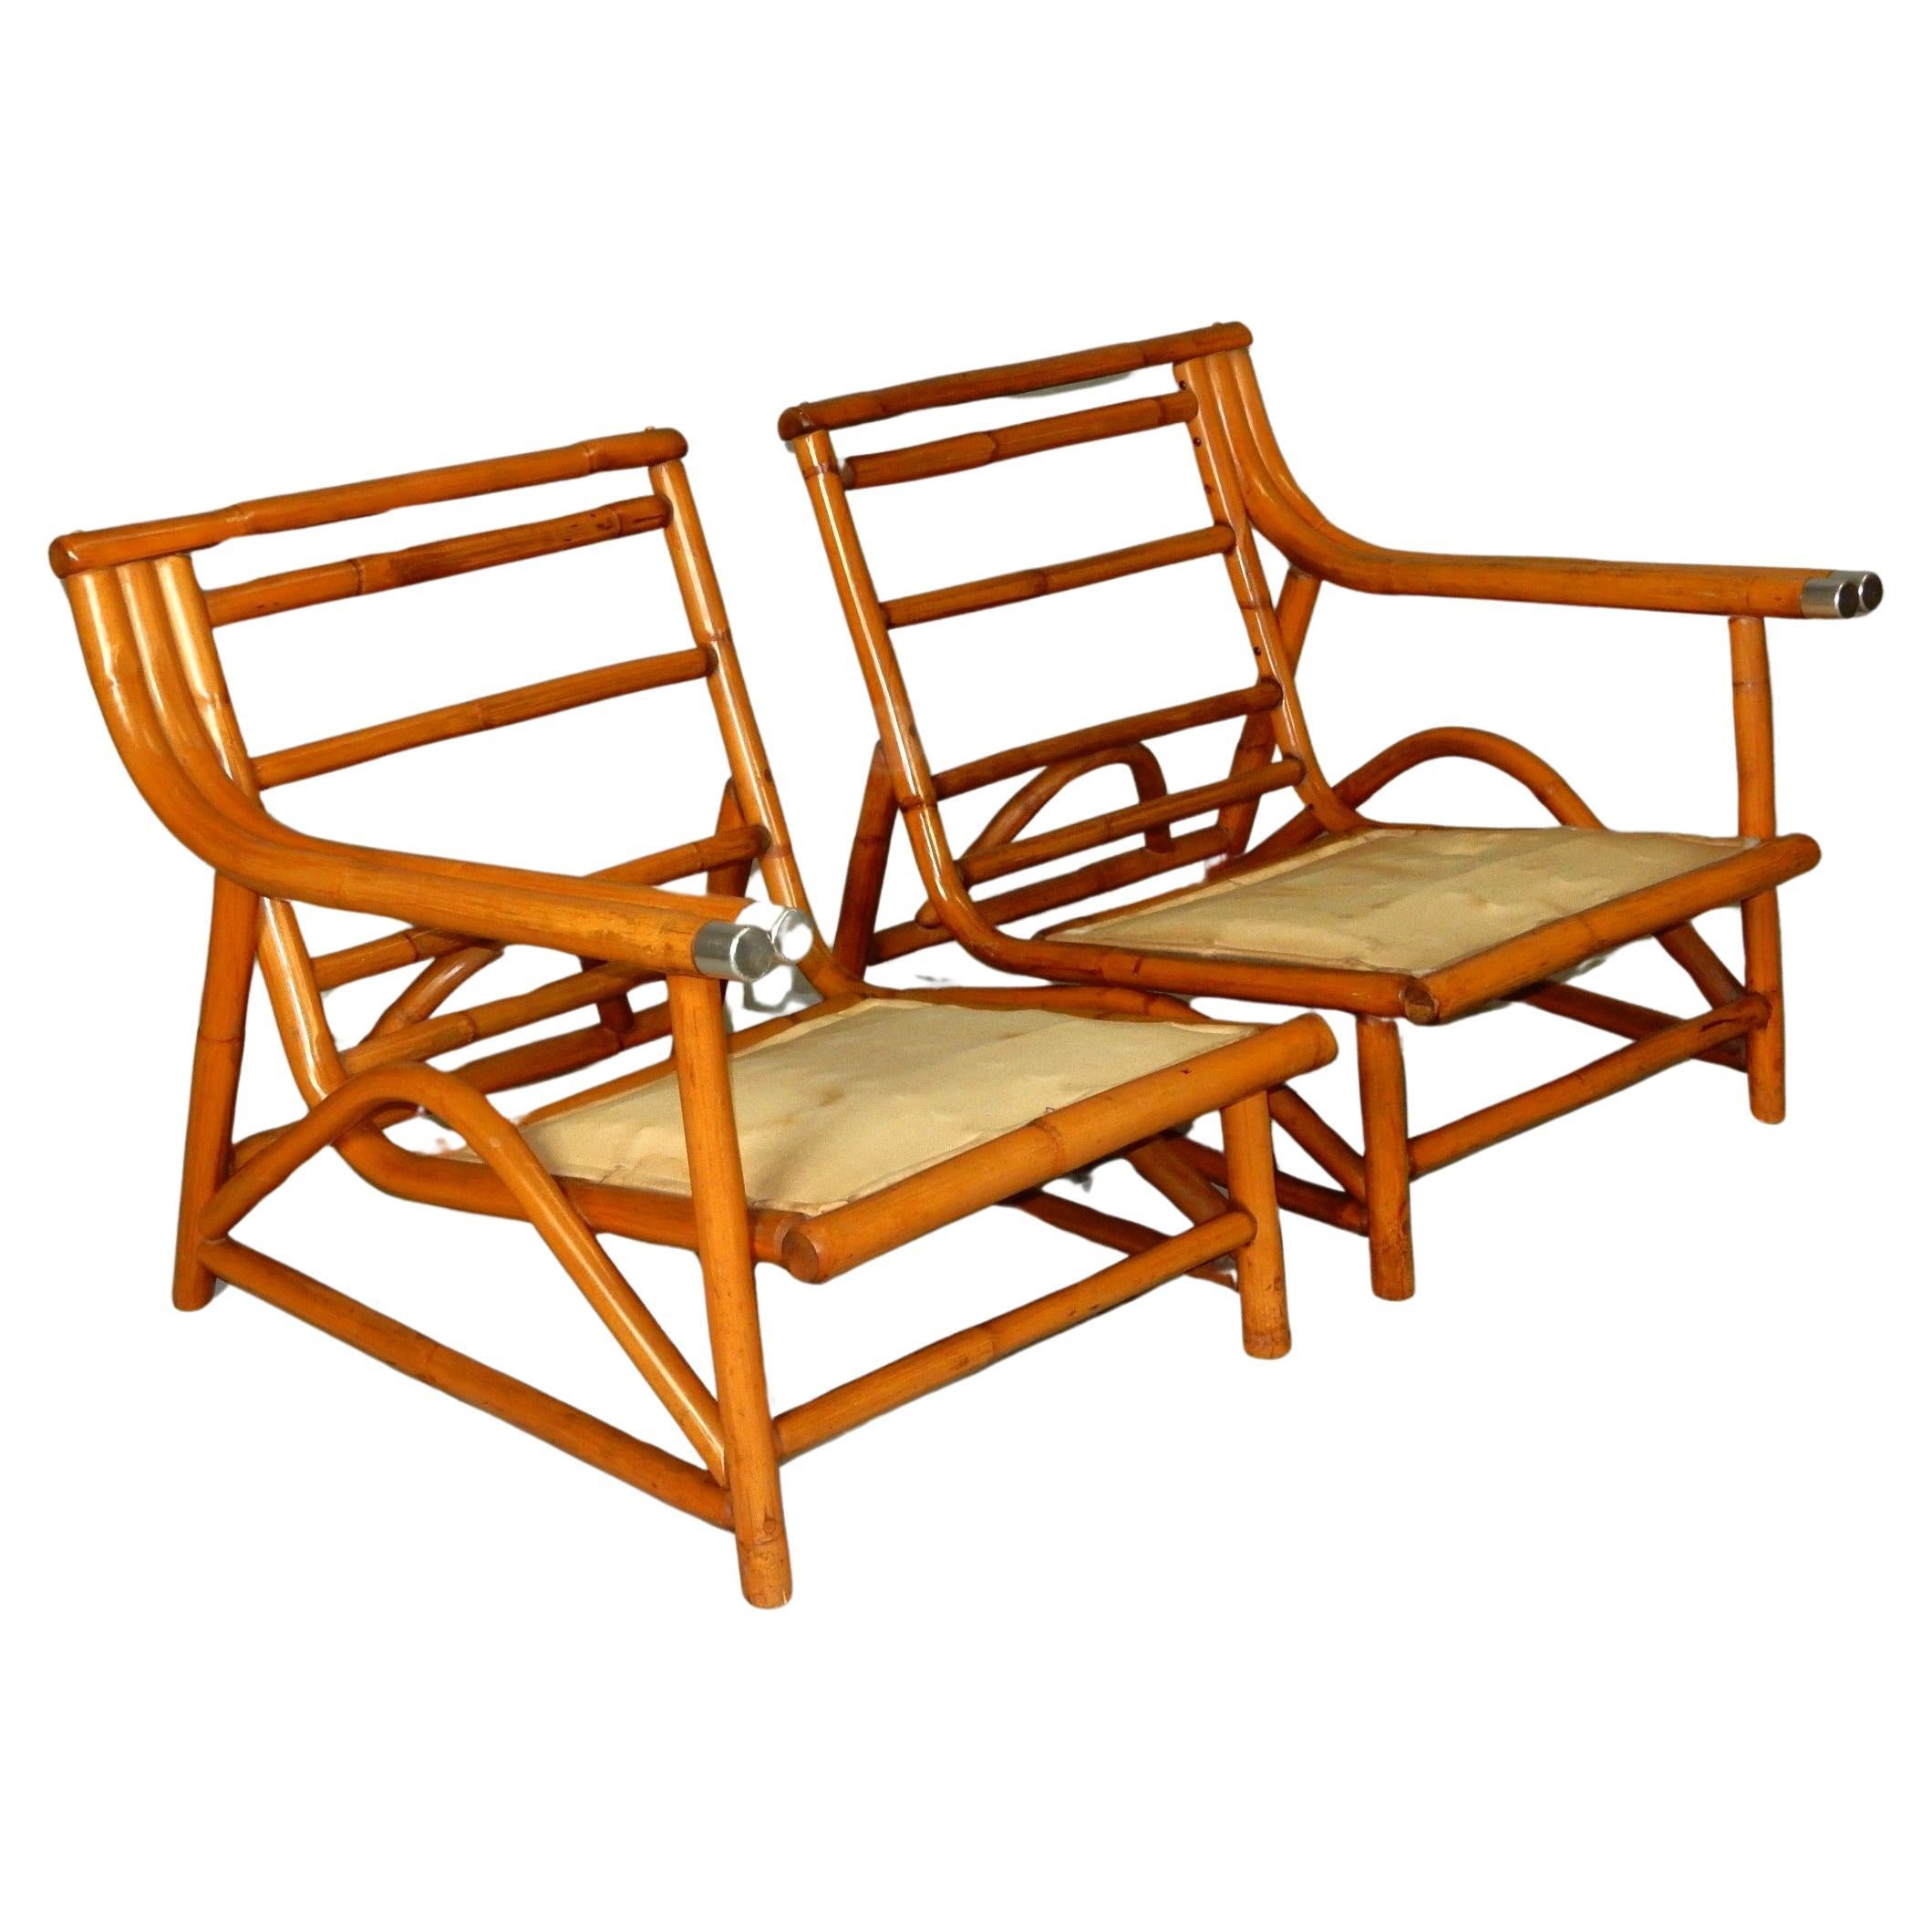 1950's Ficks Reed Rattan Split Settee or Lounge Chairs  In Good Condition For Sale In Las Vegas, NV